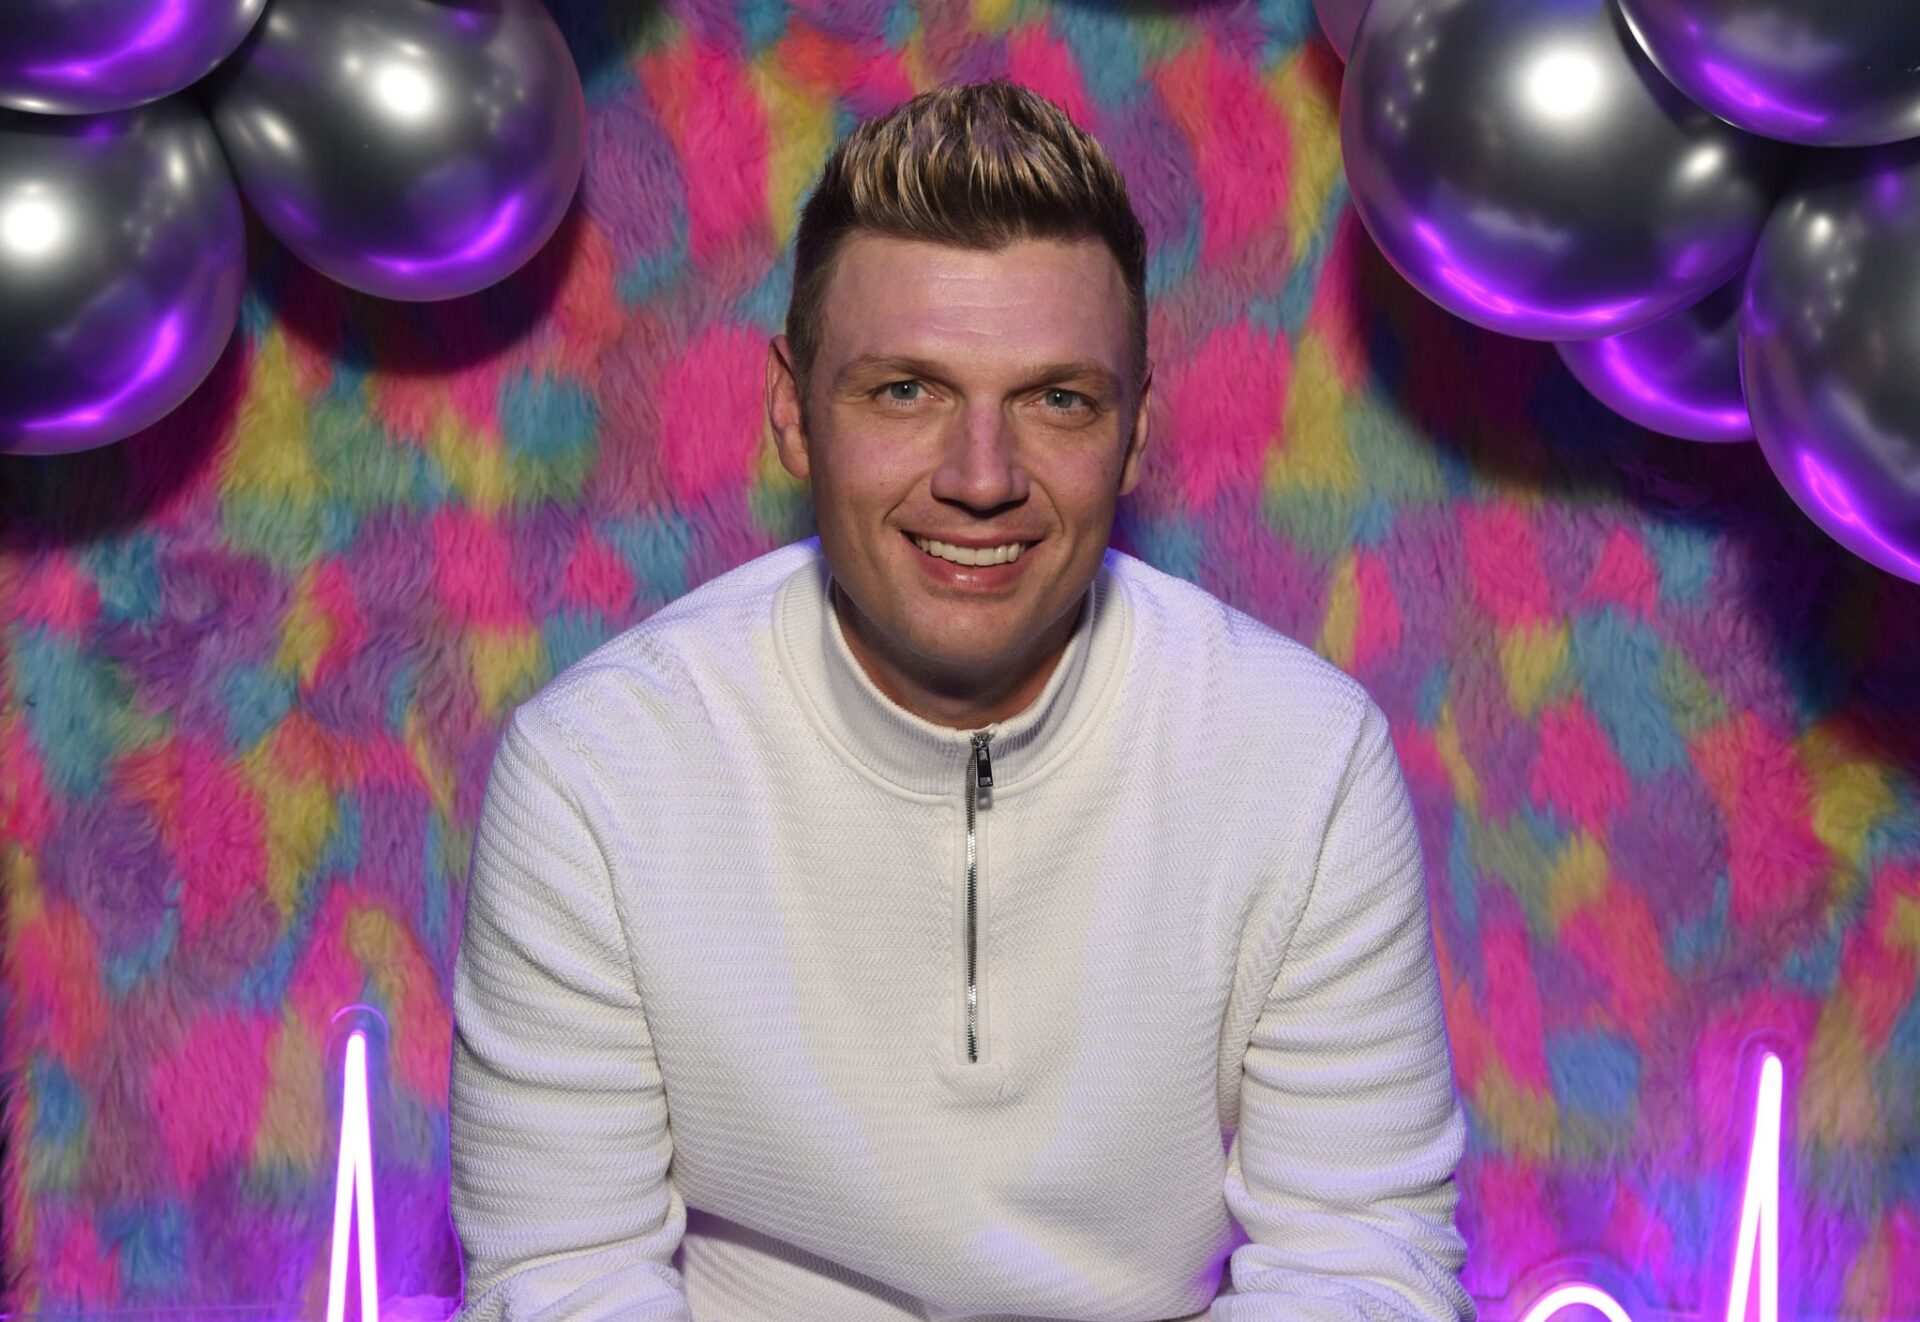 Nick Carter Biography: Age, Net Worth, Instagram, Spouse, Height, Wiki, Parents, Awards, Songs, Movies